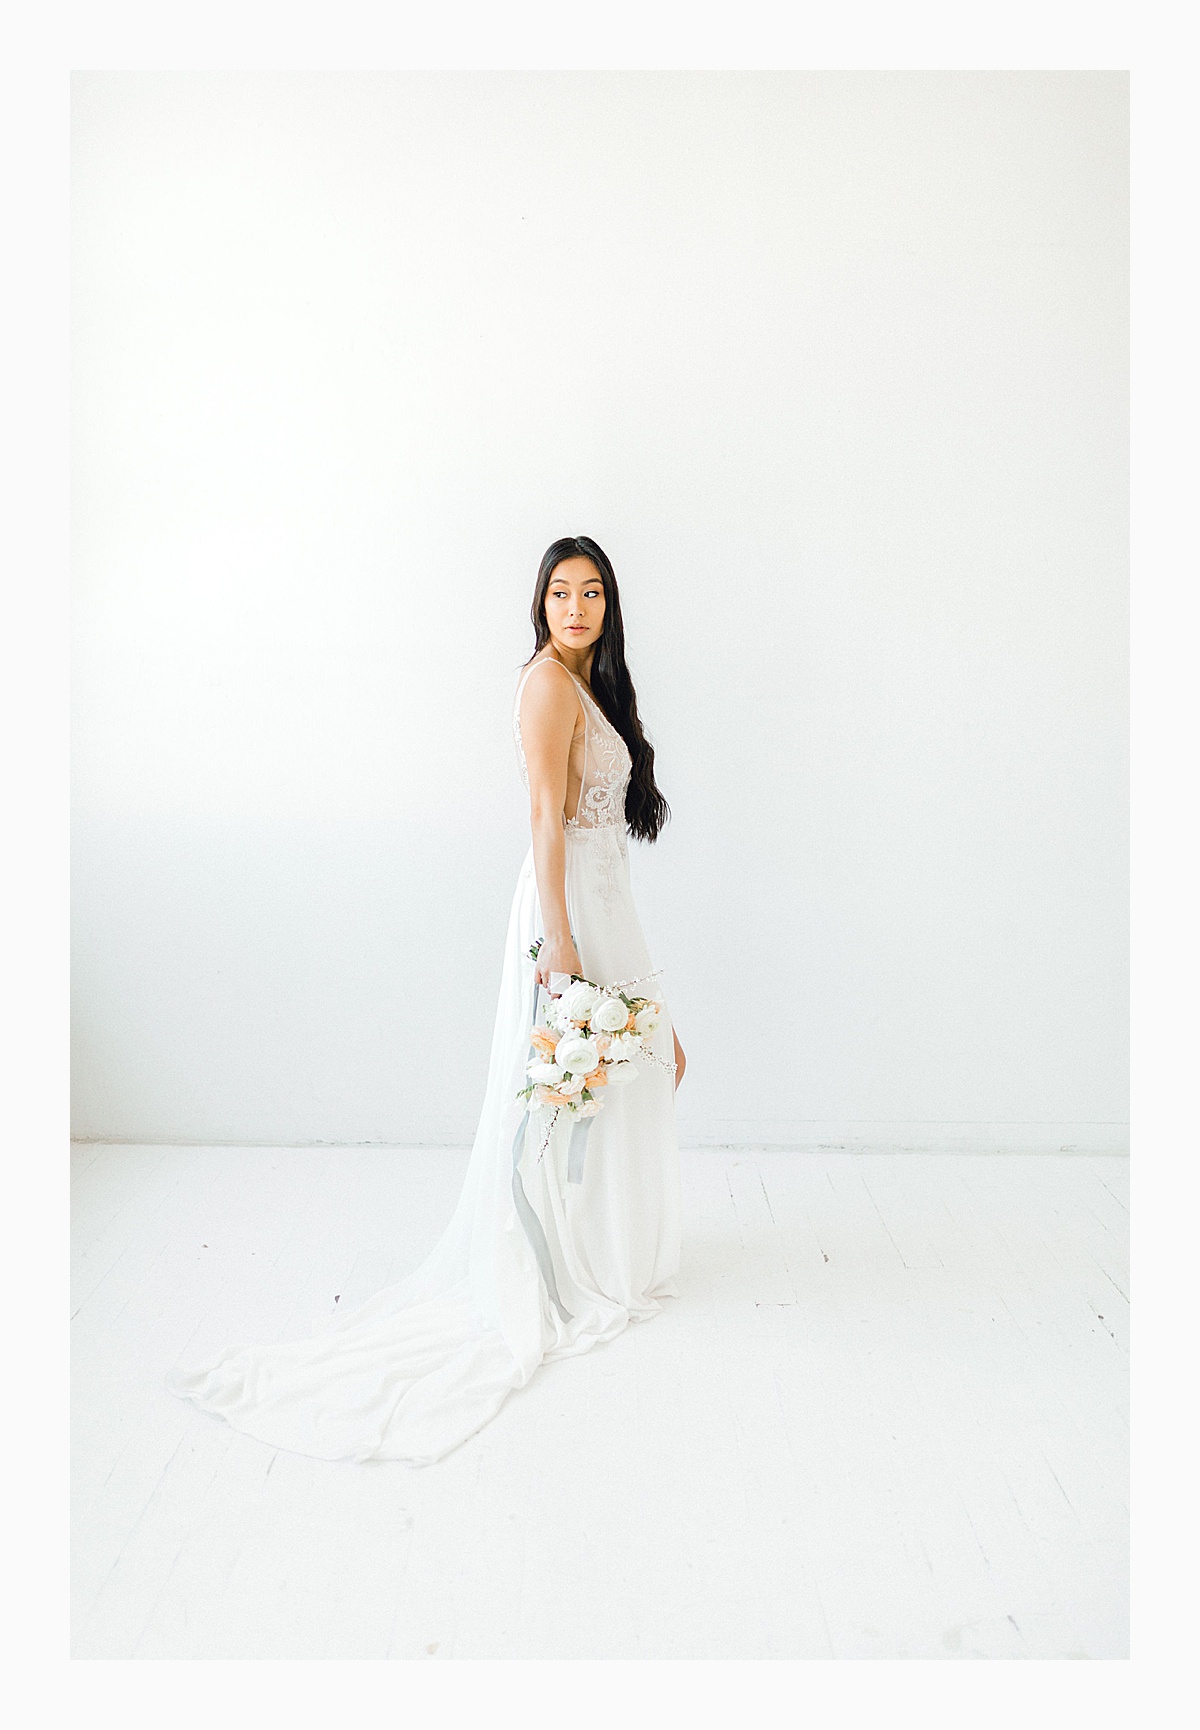 The Bemis Building in downtown Seattle is one of my favorite places to use for photo shoots!  This styled bridal shoot with touches of peach and white was dreamy.  #emmarosecompany #kindredpresets #seattlebride_0017.jpg